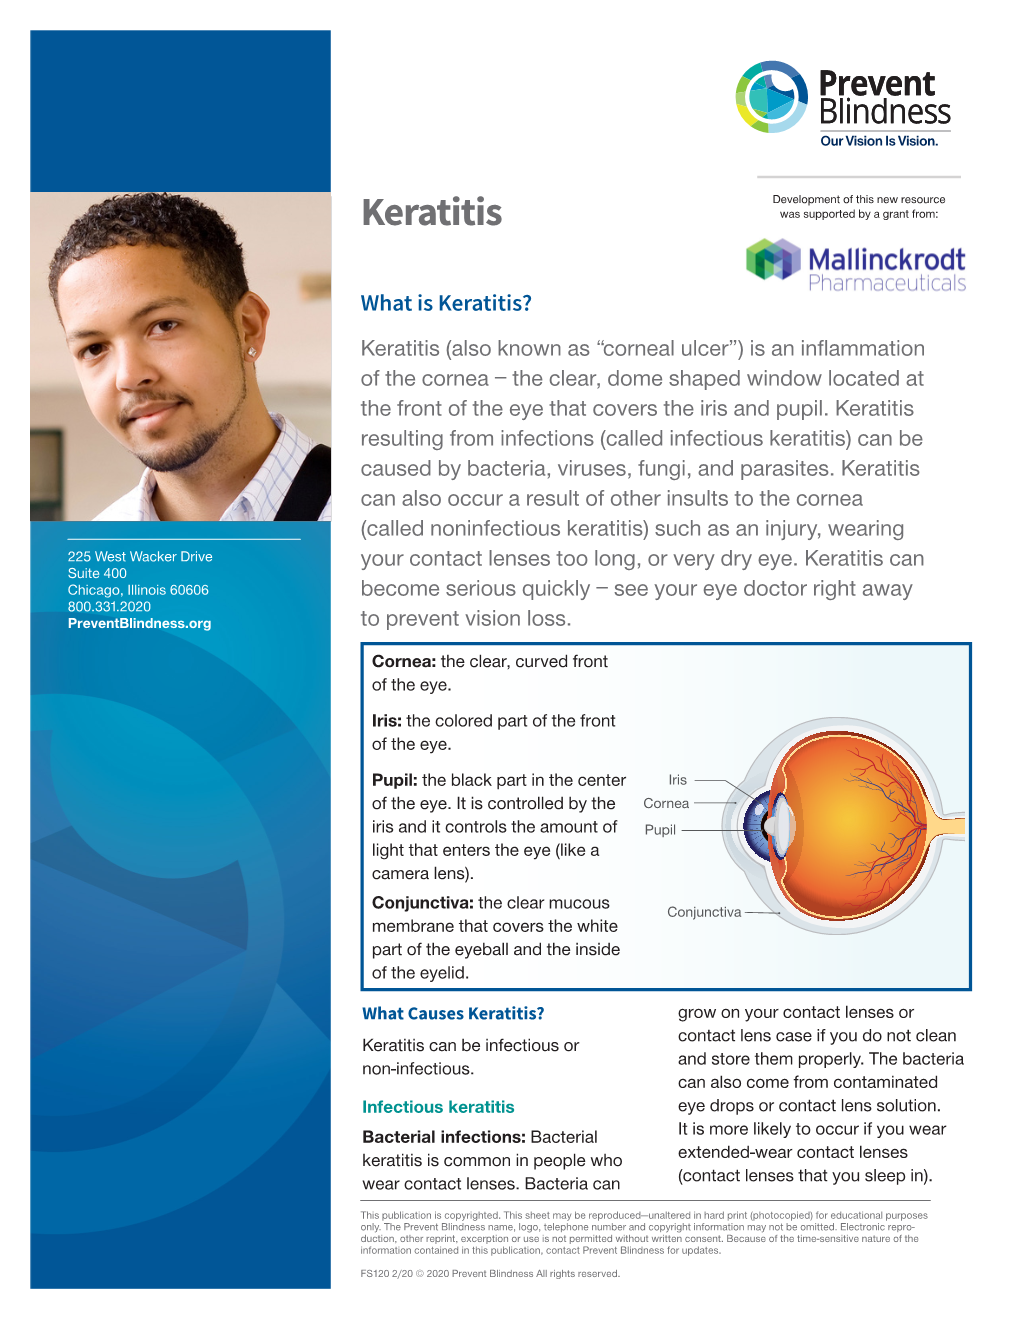 Keratitis Was Supported by a Grant From